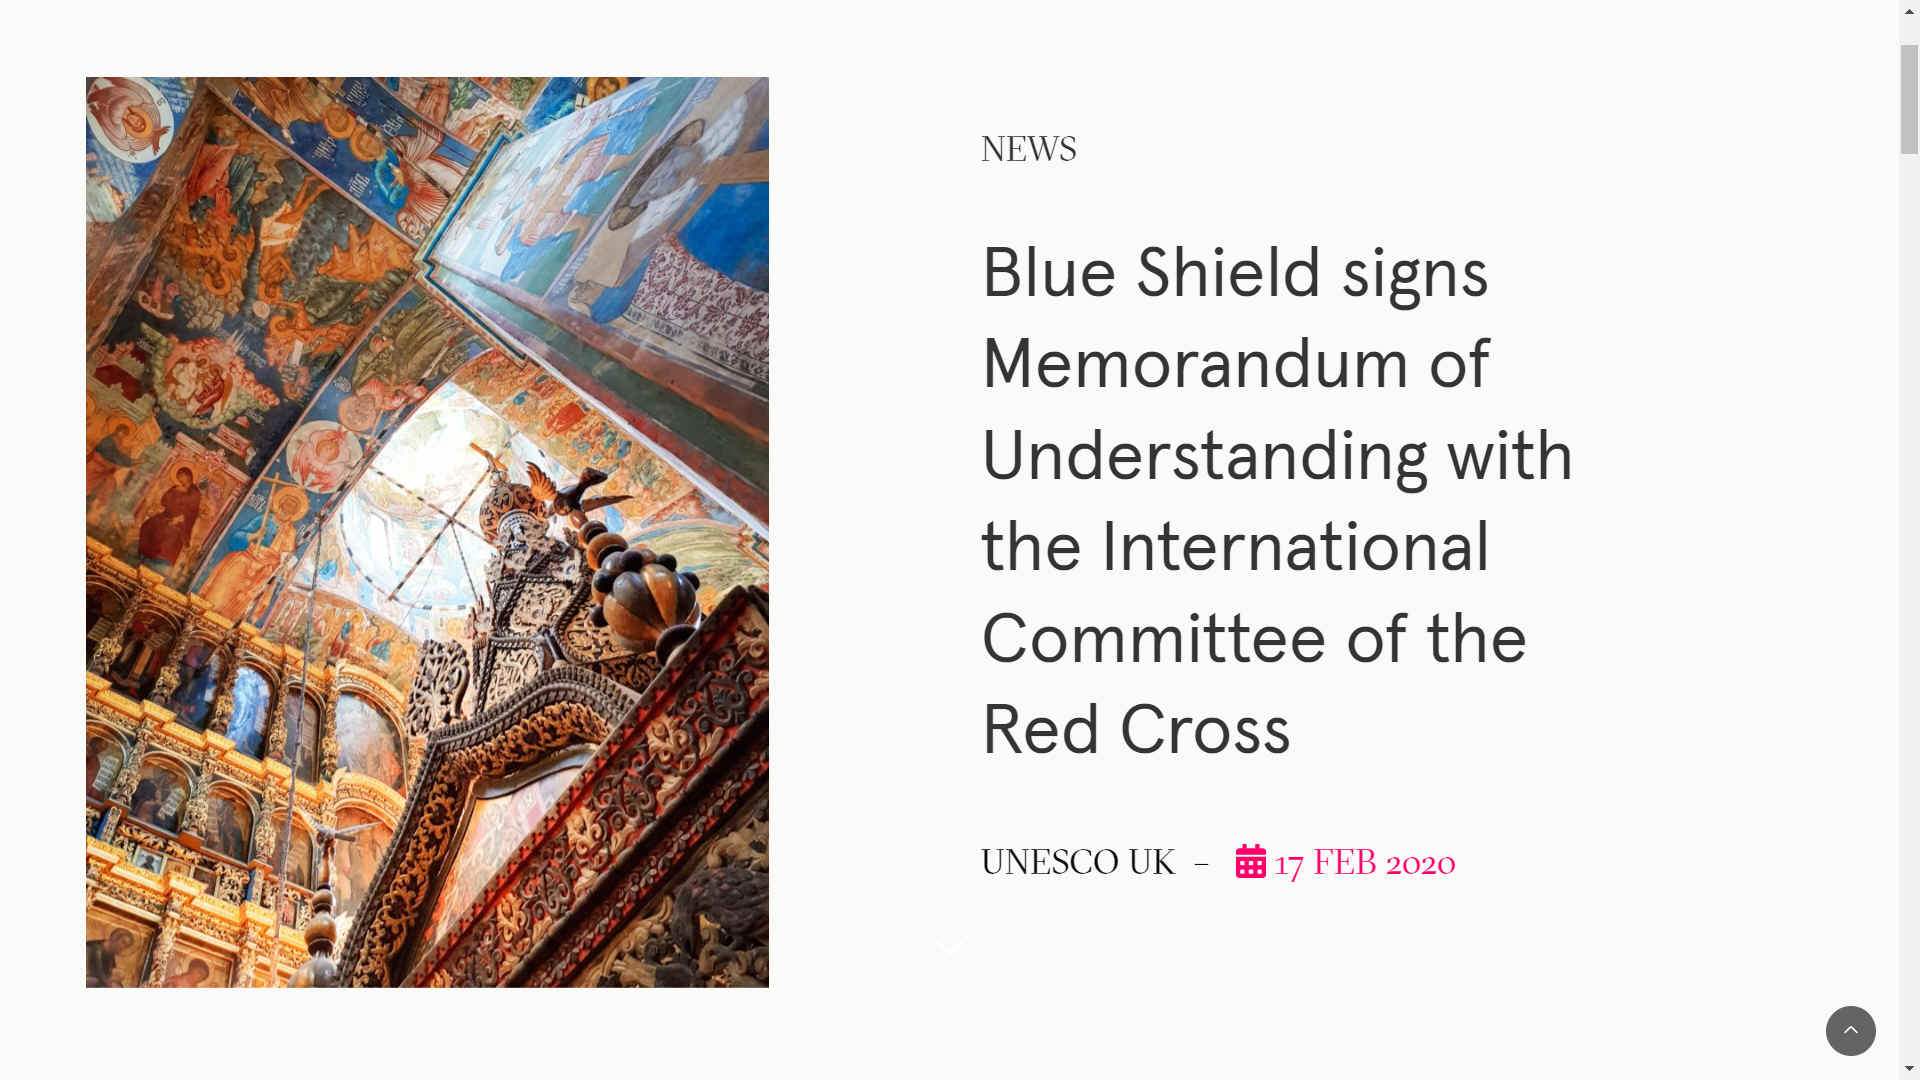 Blue Shield signs Memorandum of Understanding with the International Committee of the Red Cross